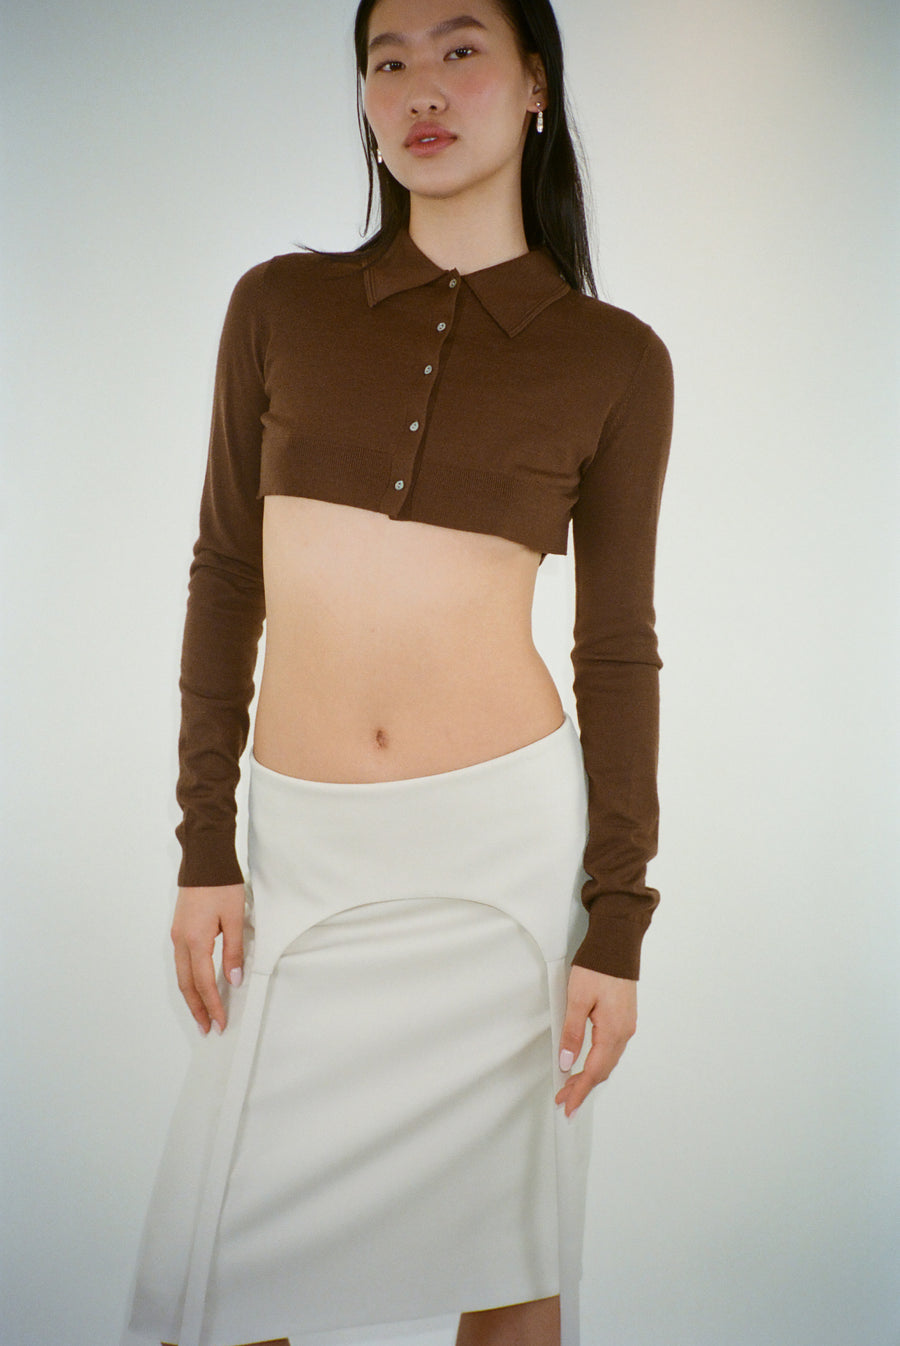 Cropped long sleeve cardigan in espresso brown on model